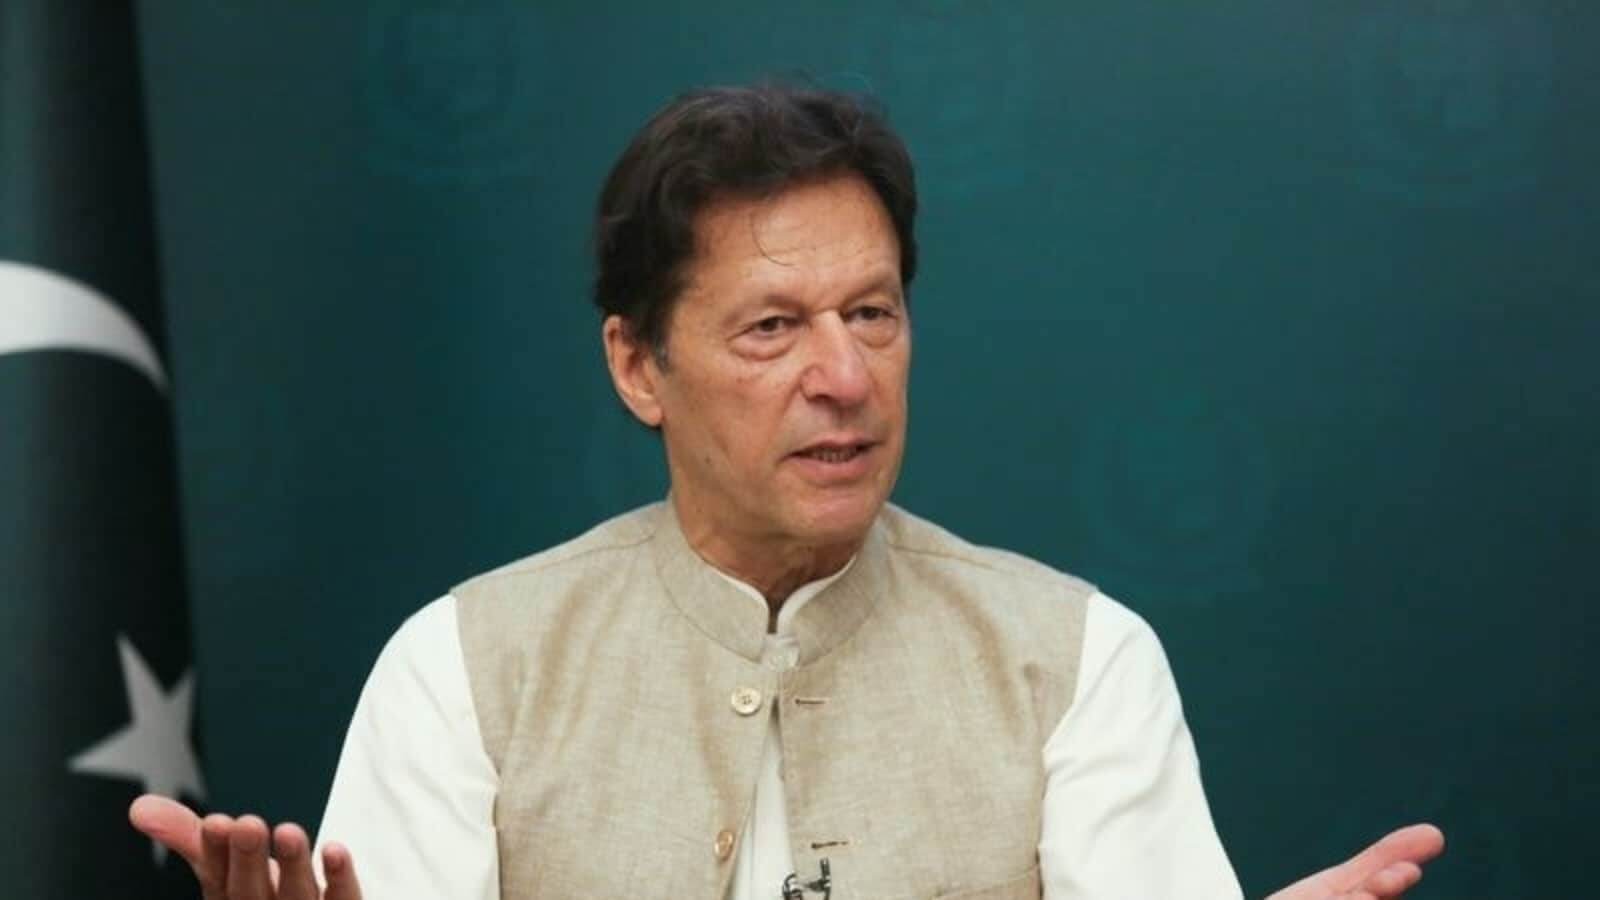 SUMMARY: Pakistan PM Imran Khan’s Interview With PBS